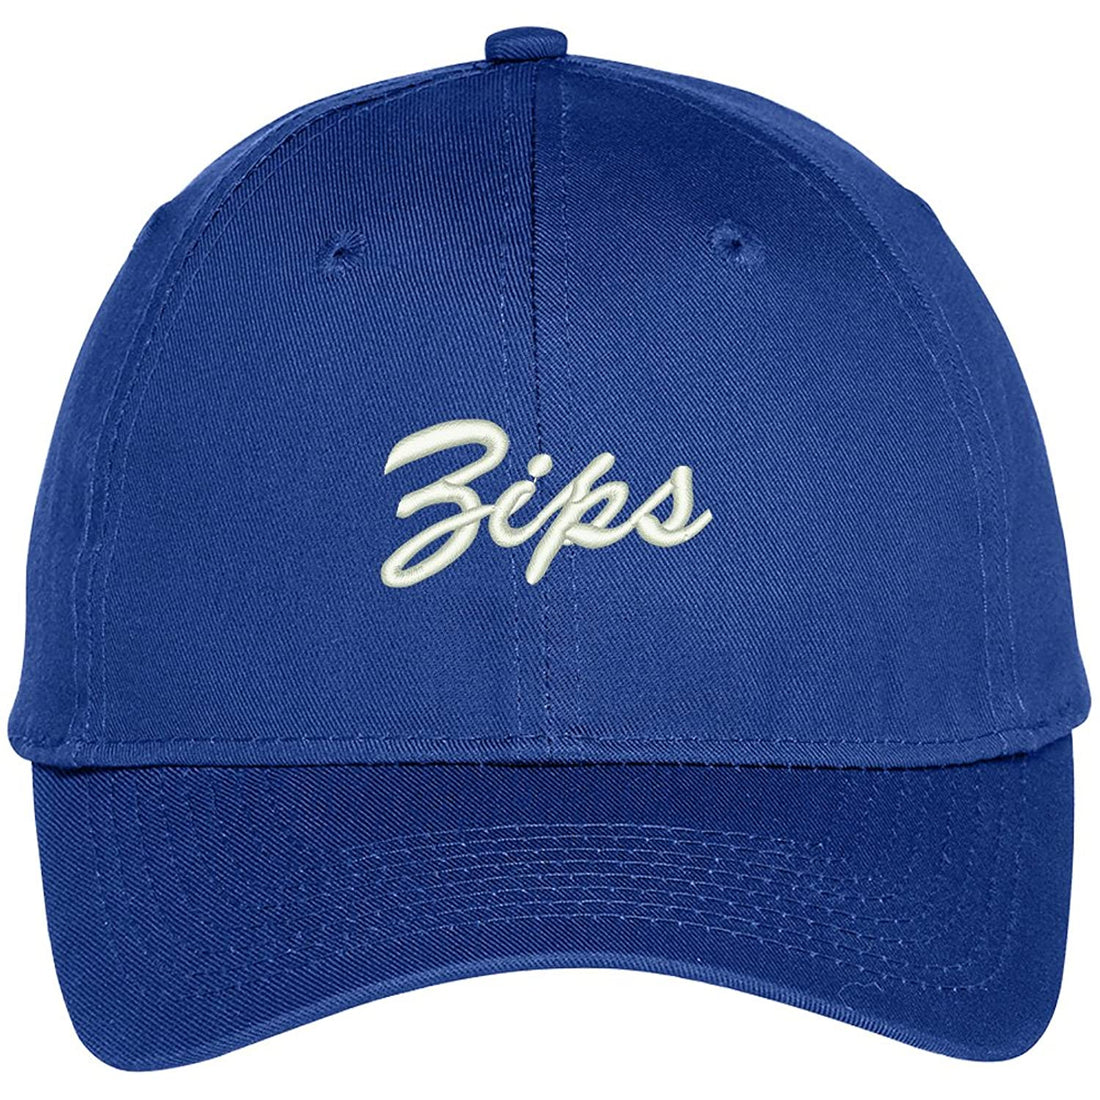 Trendy Apparel Shop Zips Embroidered Team Nickname Mascot Cap